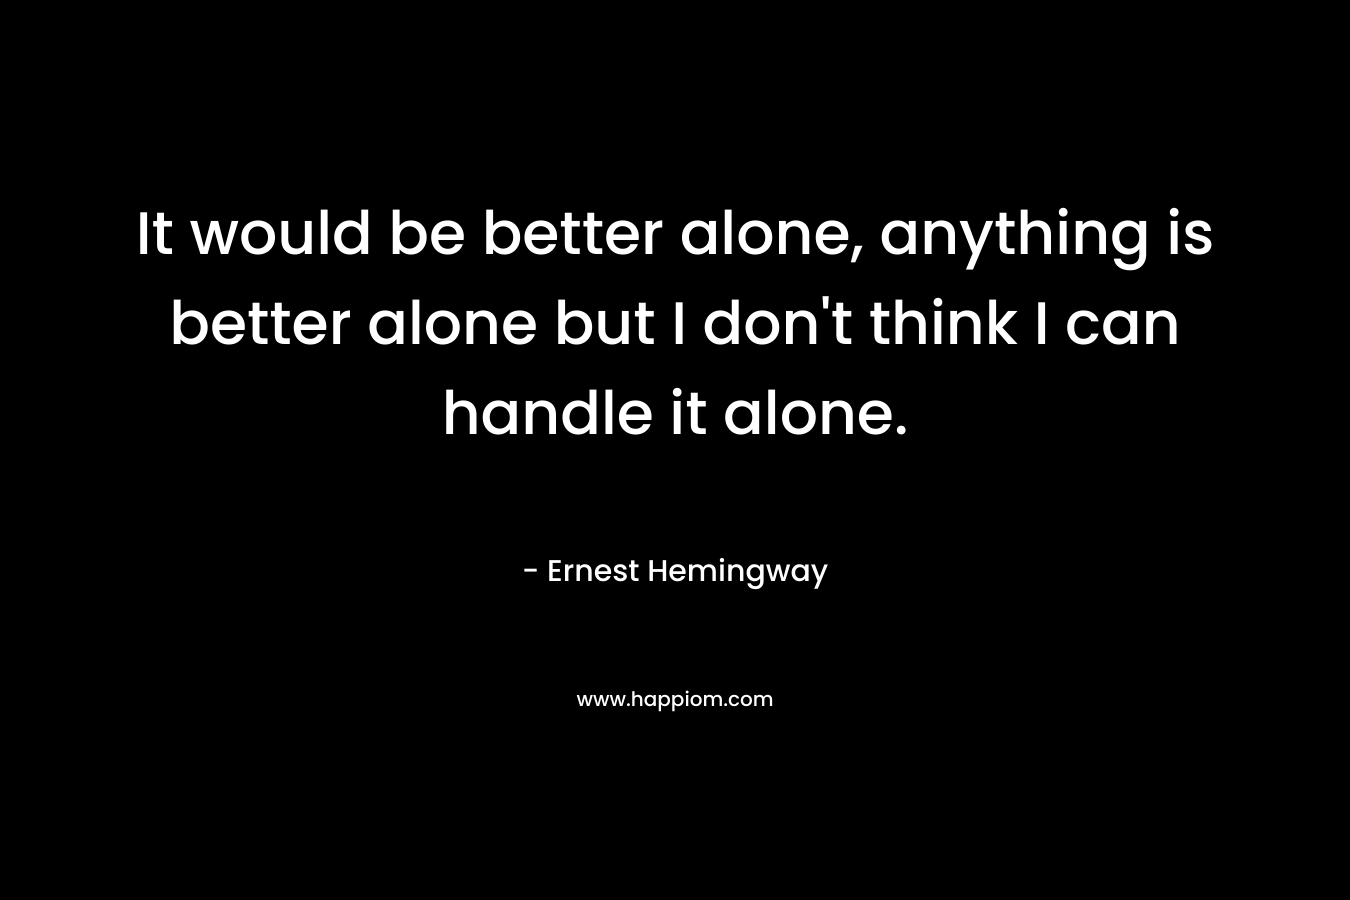 It would be better alone, anything is better alone but I don’t think I can handle it alone. – Ernest Hemingway